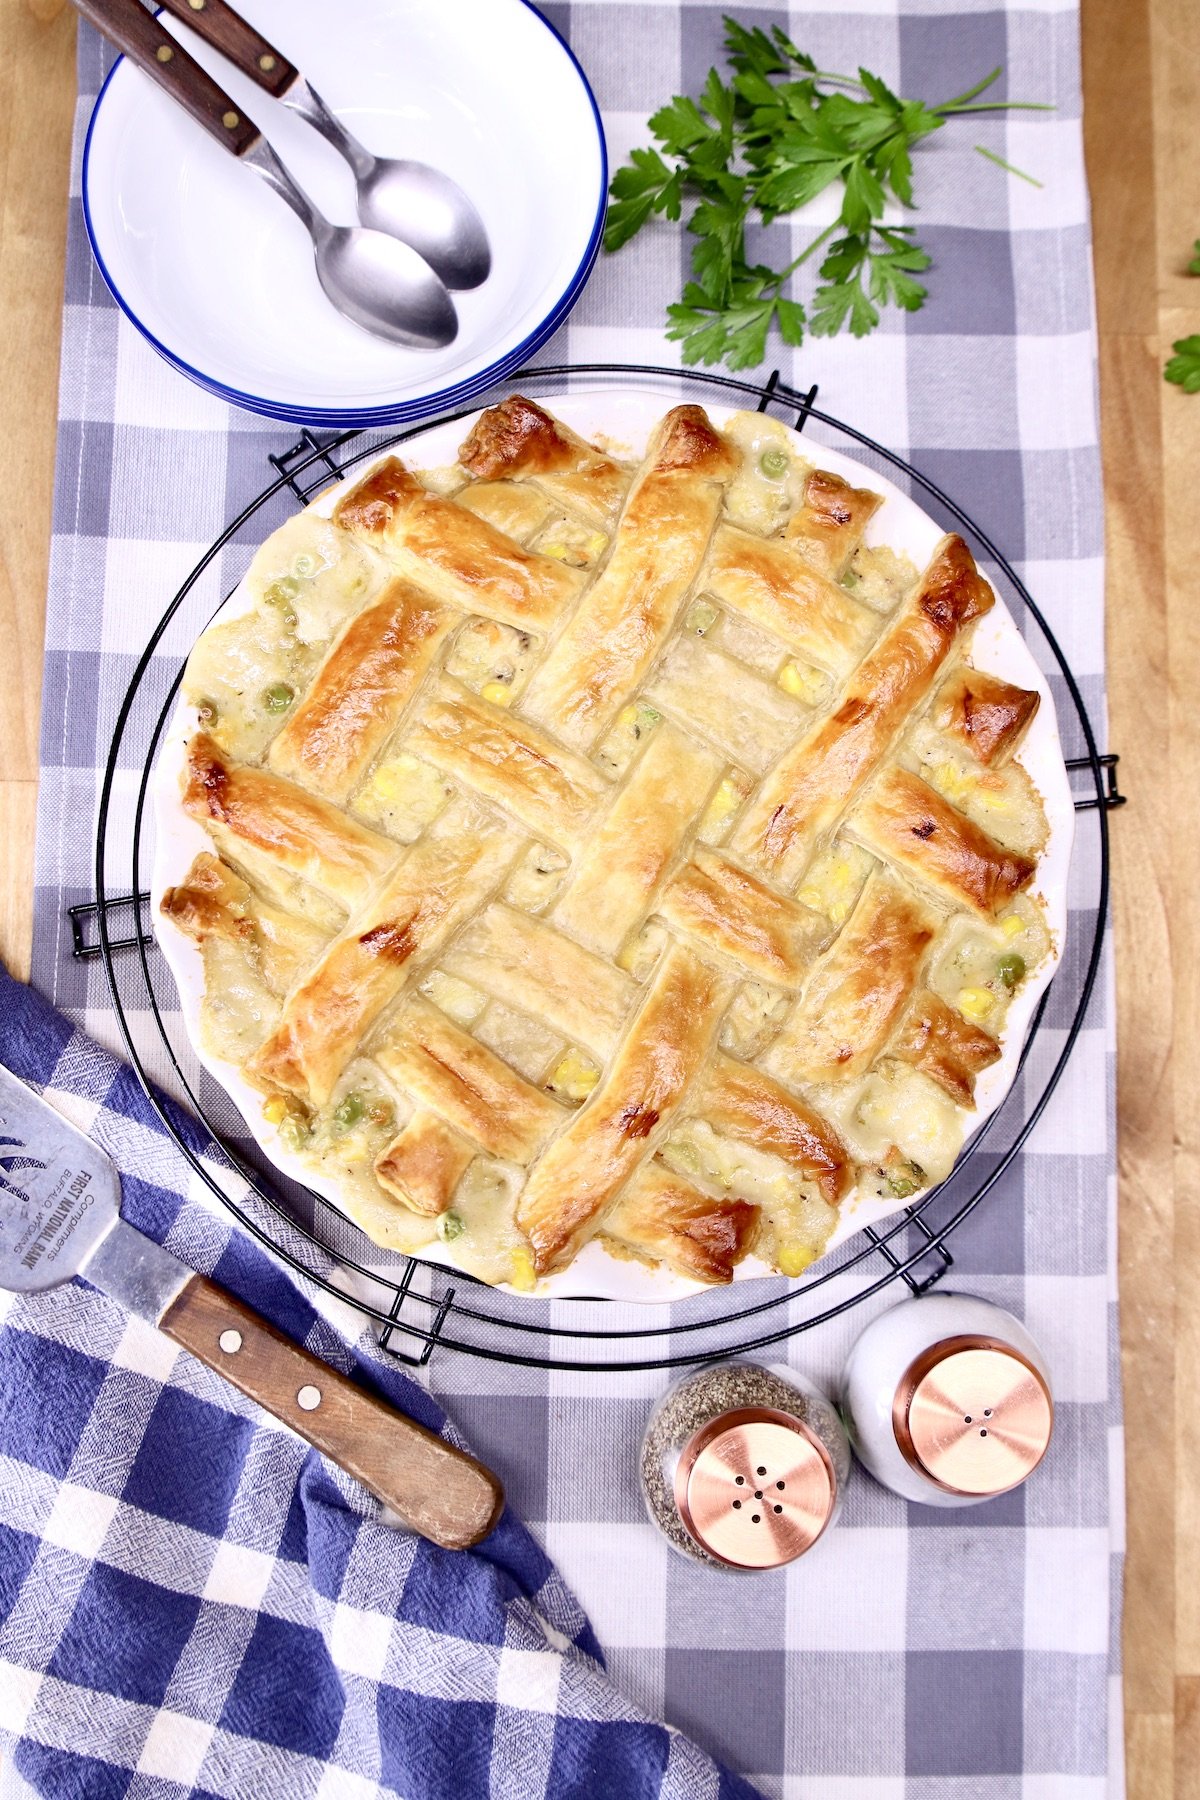 chicken pot pie on a checked table runner with bowls, spoons, salt and pepper shakers